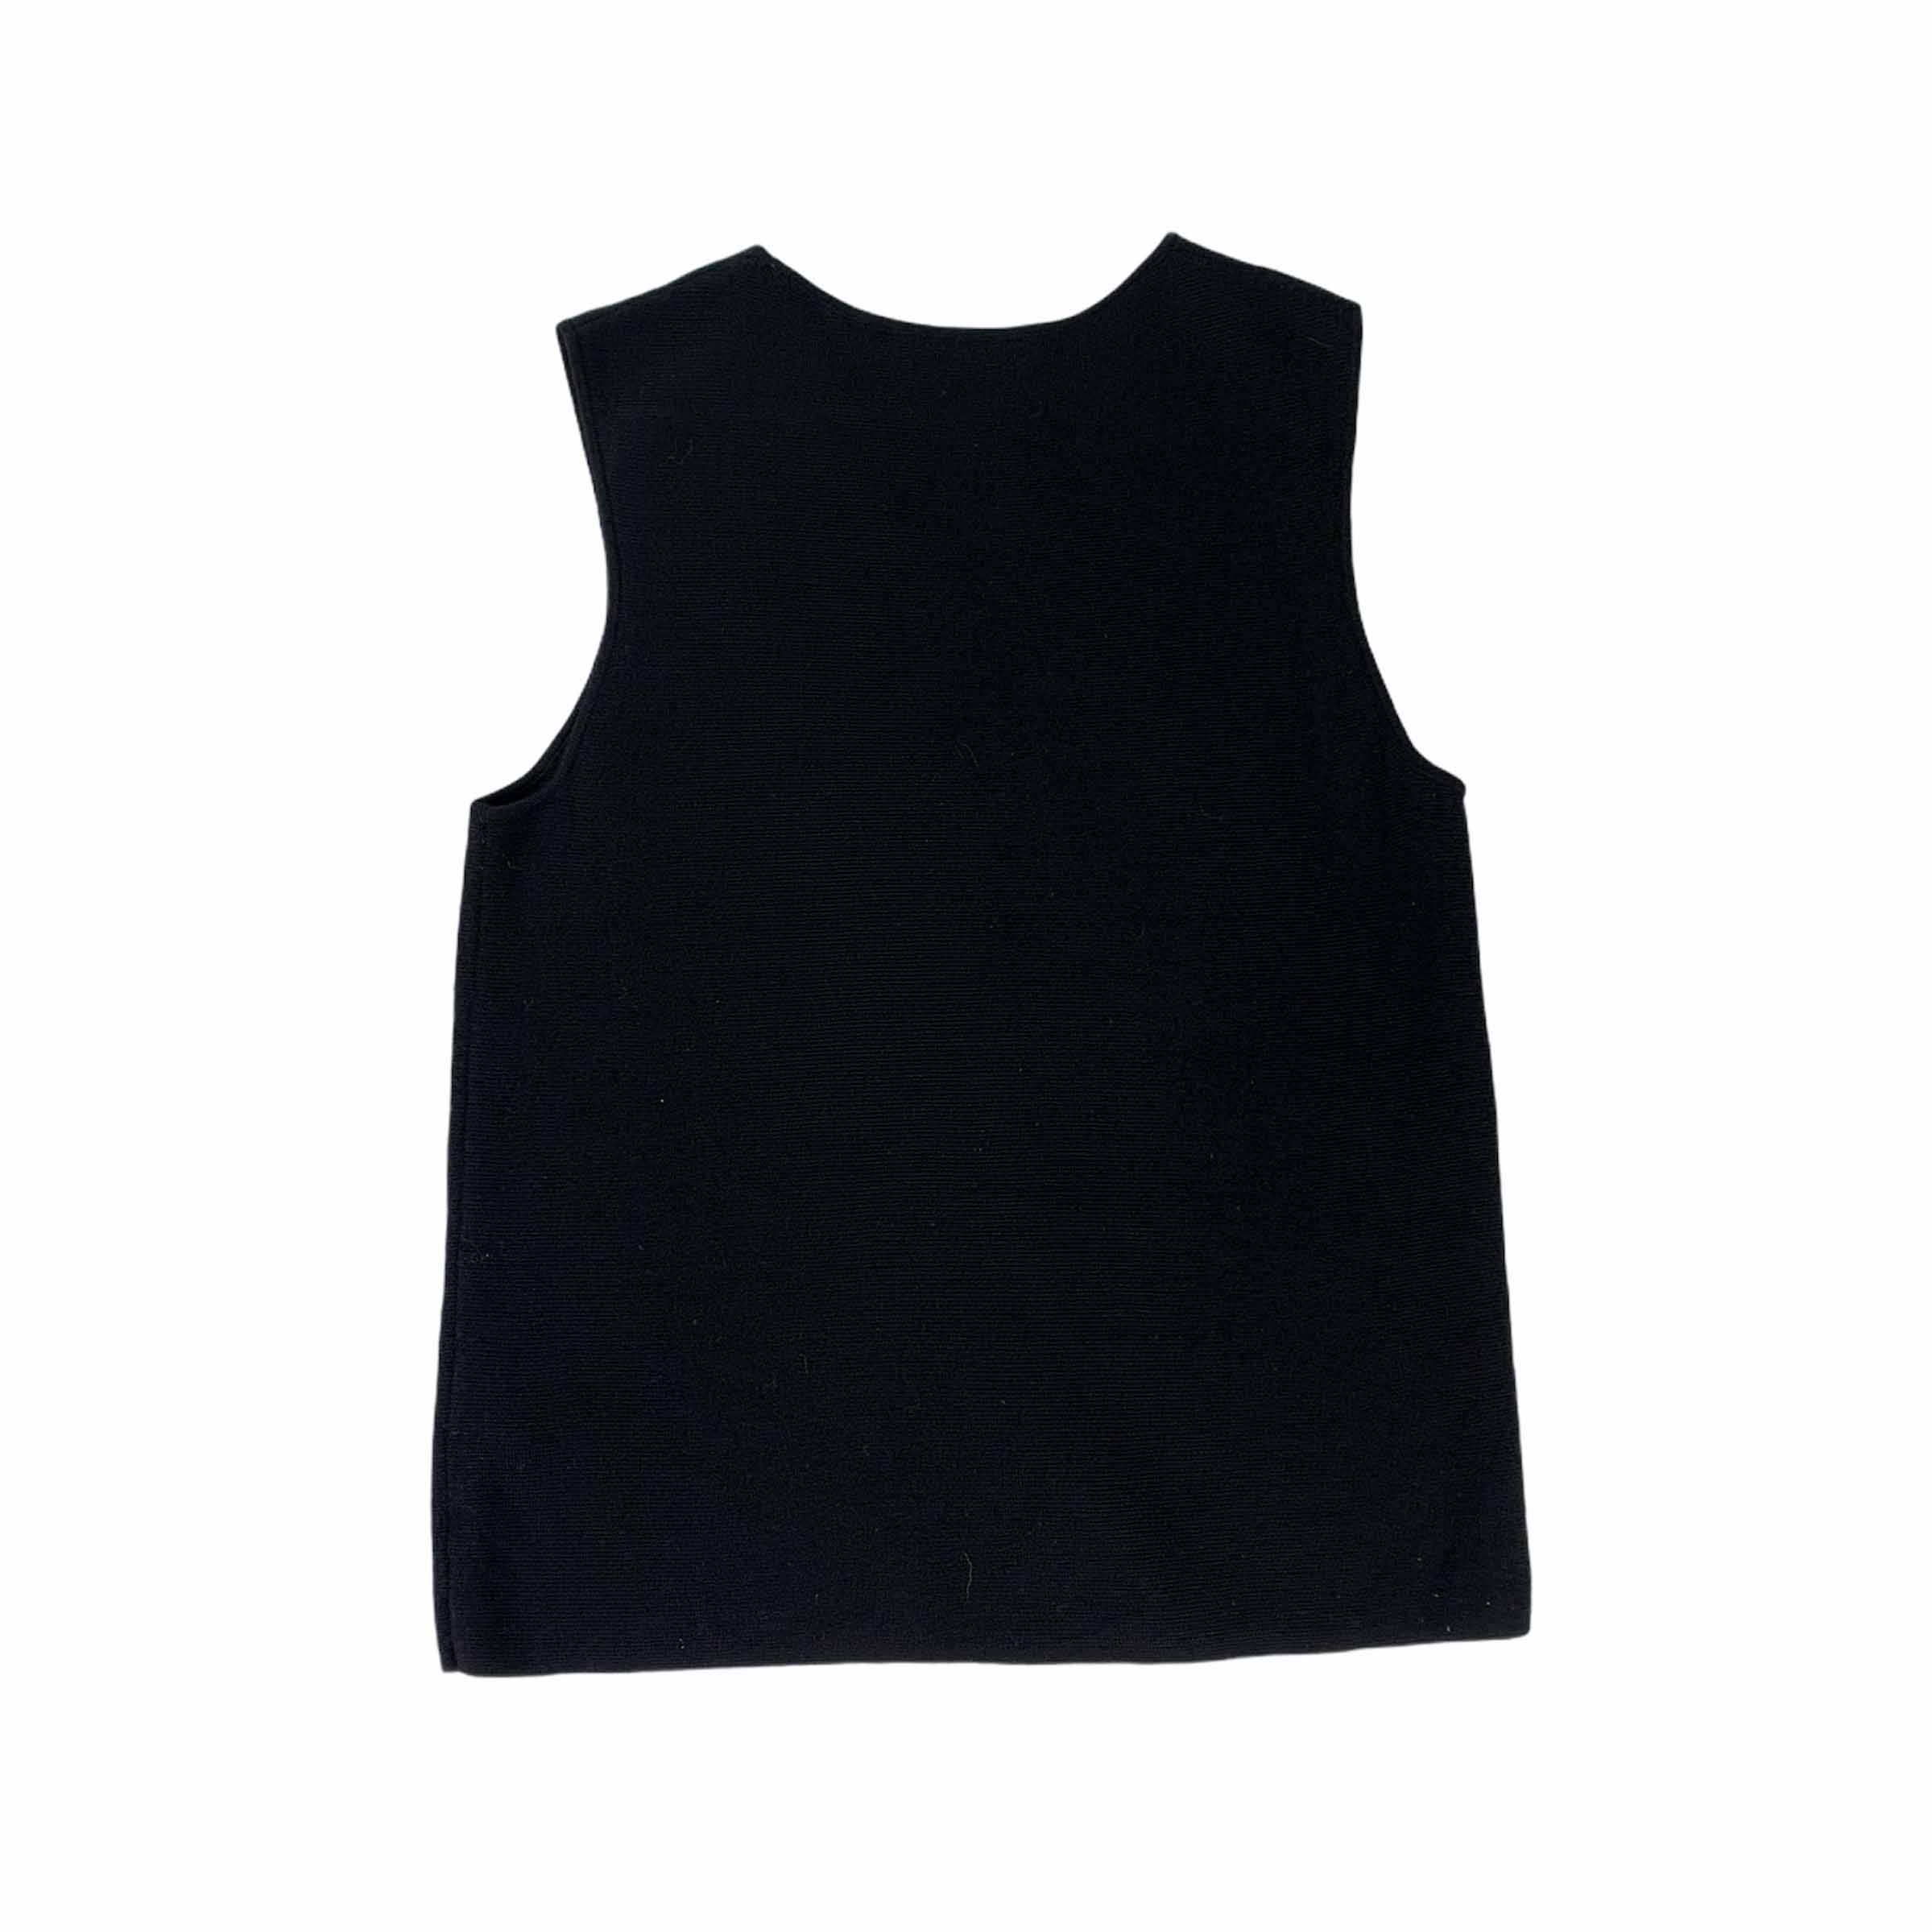 [COS] Sleeveless Knit Top BK - Size S